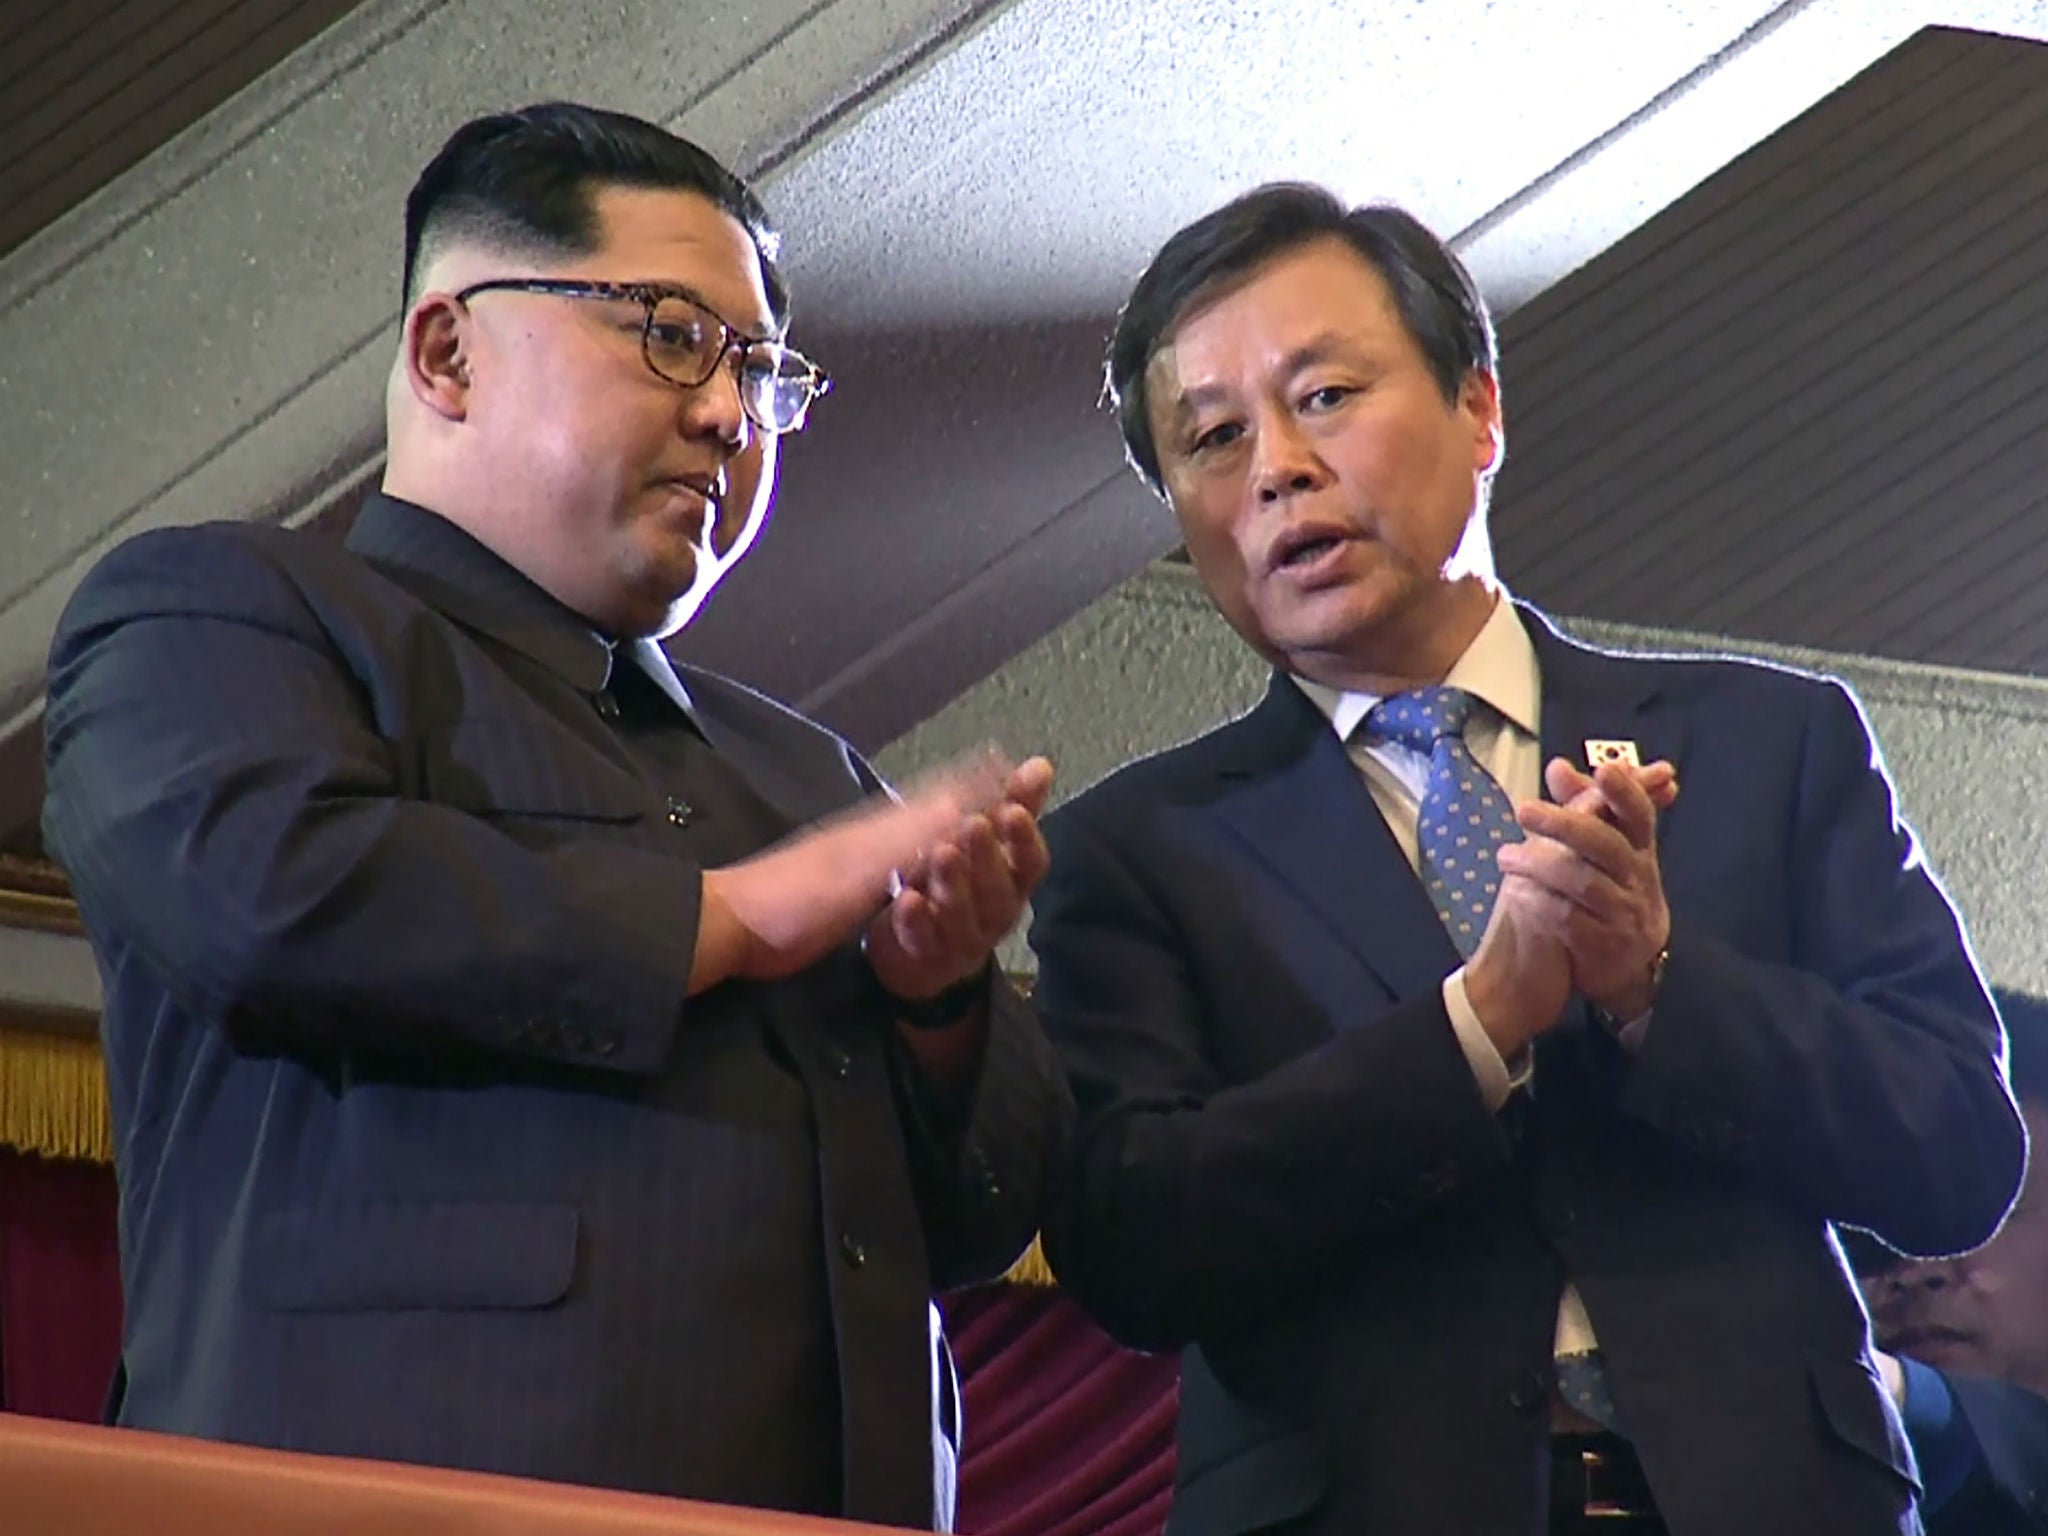 North Korean leader Kim Jong-un and South Korea's Culture, Sports and Tourism Minister Do Jong-whan during a rare concert by South Korean musicians in Pyongyang, North Korea